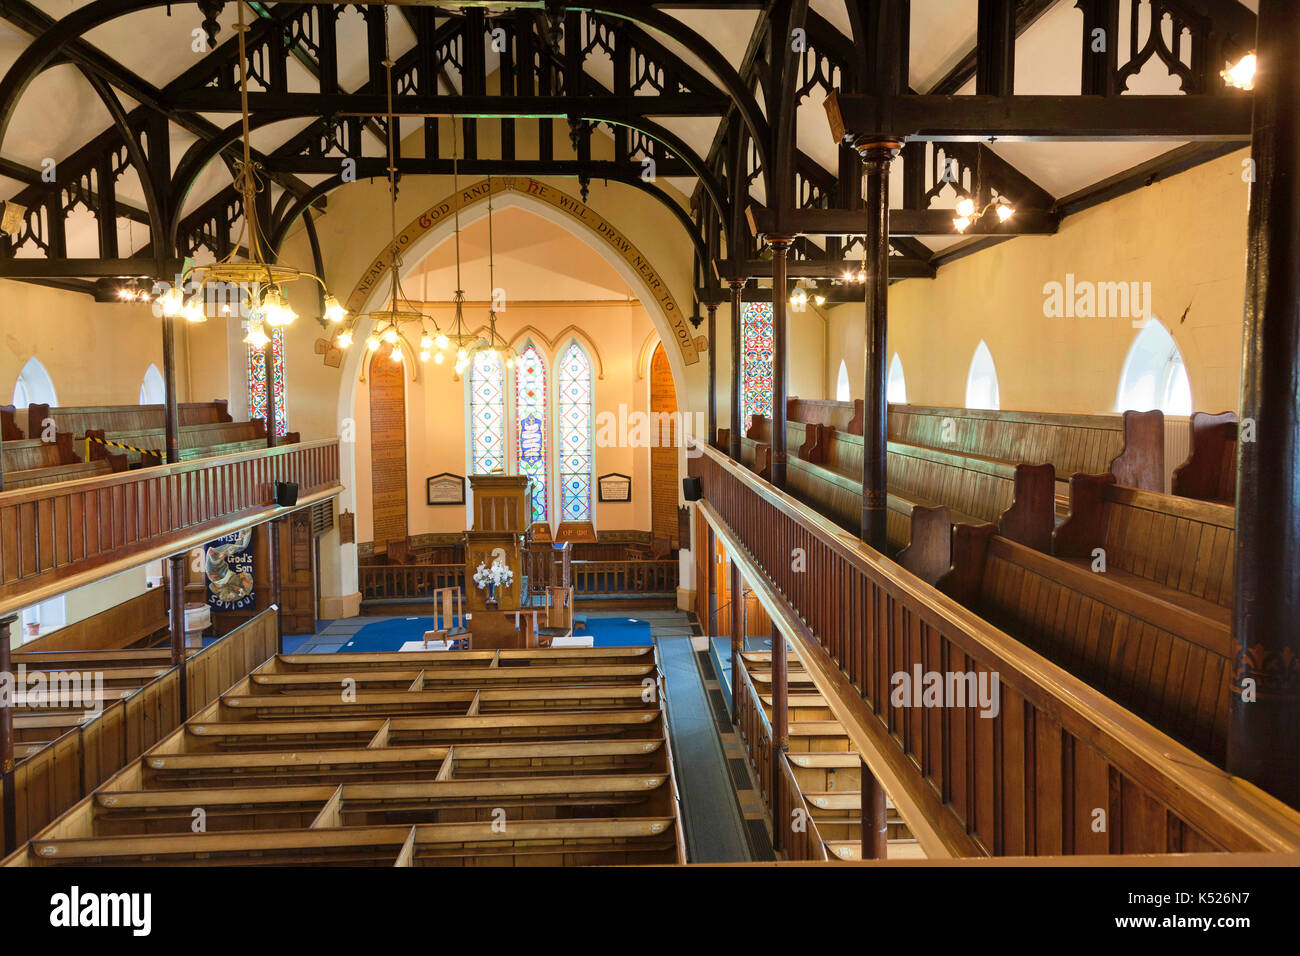 St Clement's Church, Toxteth, Liverpool, Grade II Listed Anglican church dating from 1840. Rare survivor of a pre-Ecclesiological Victorian church. Stock Photo